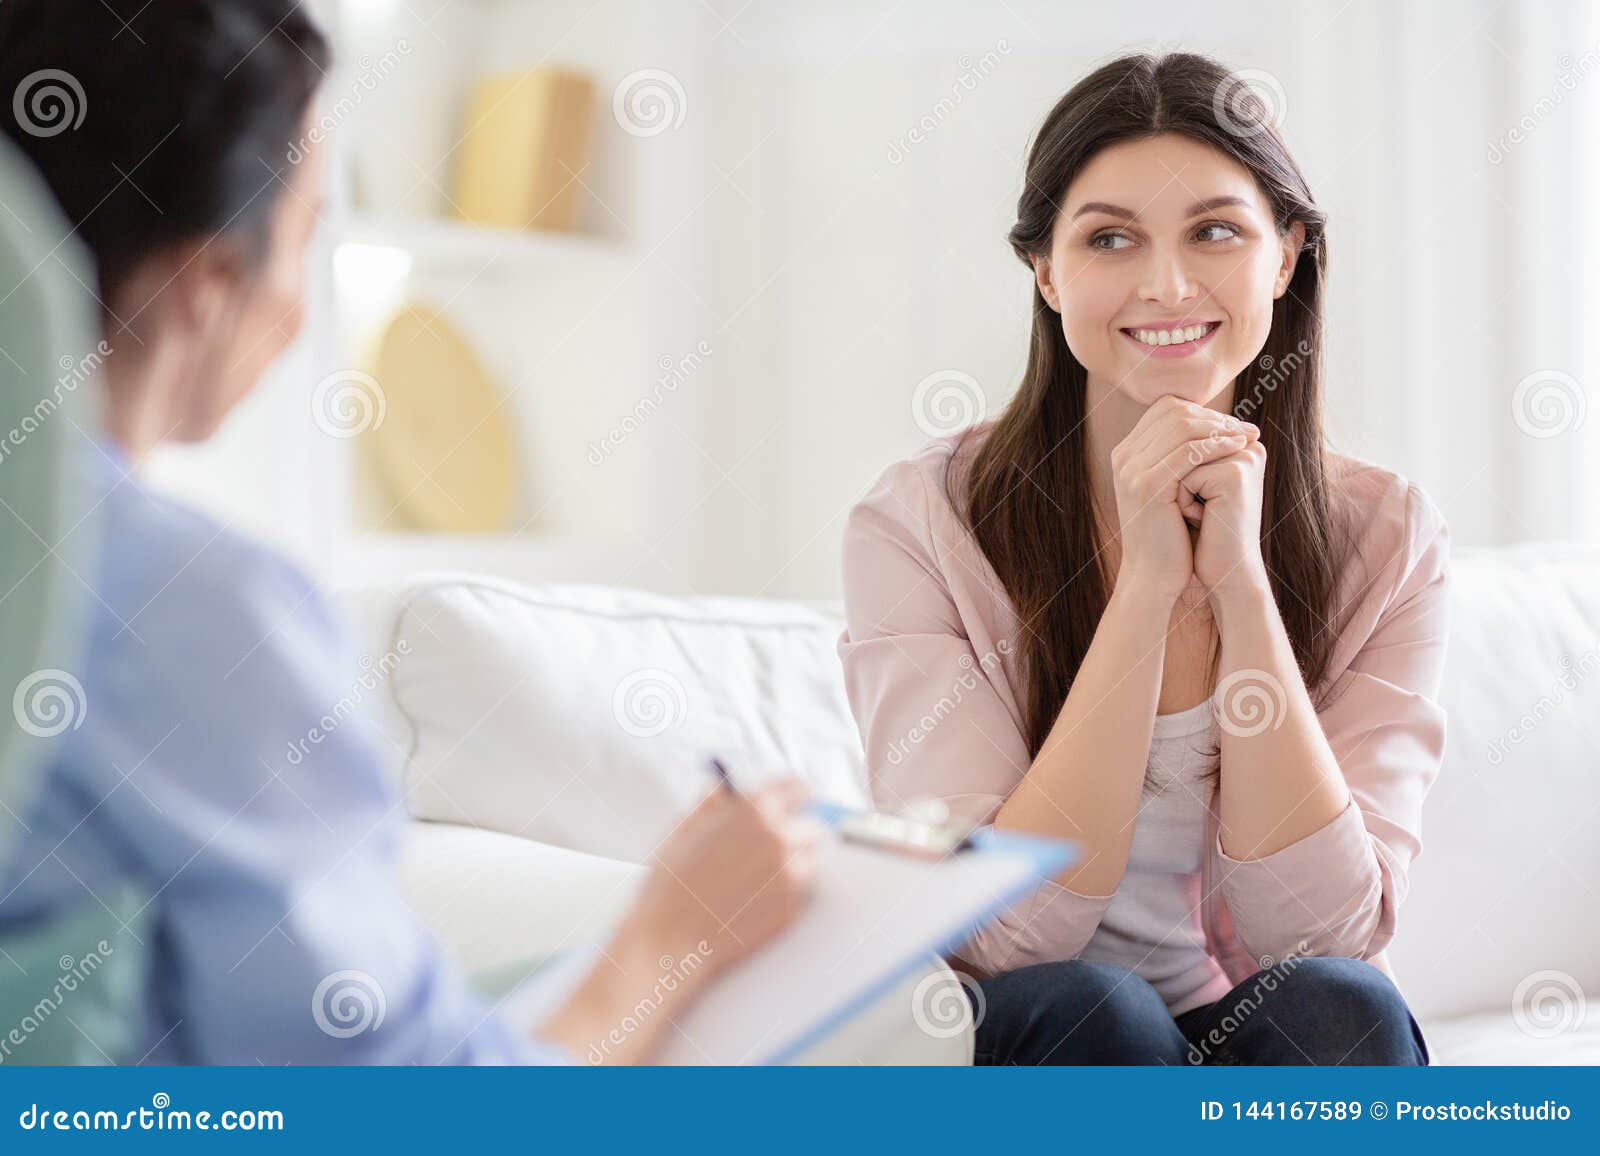 smiling woman talking to wellness coach about motivation